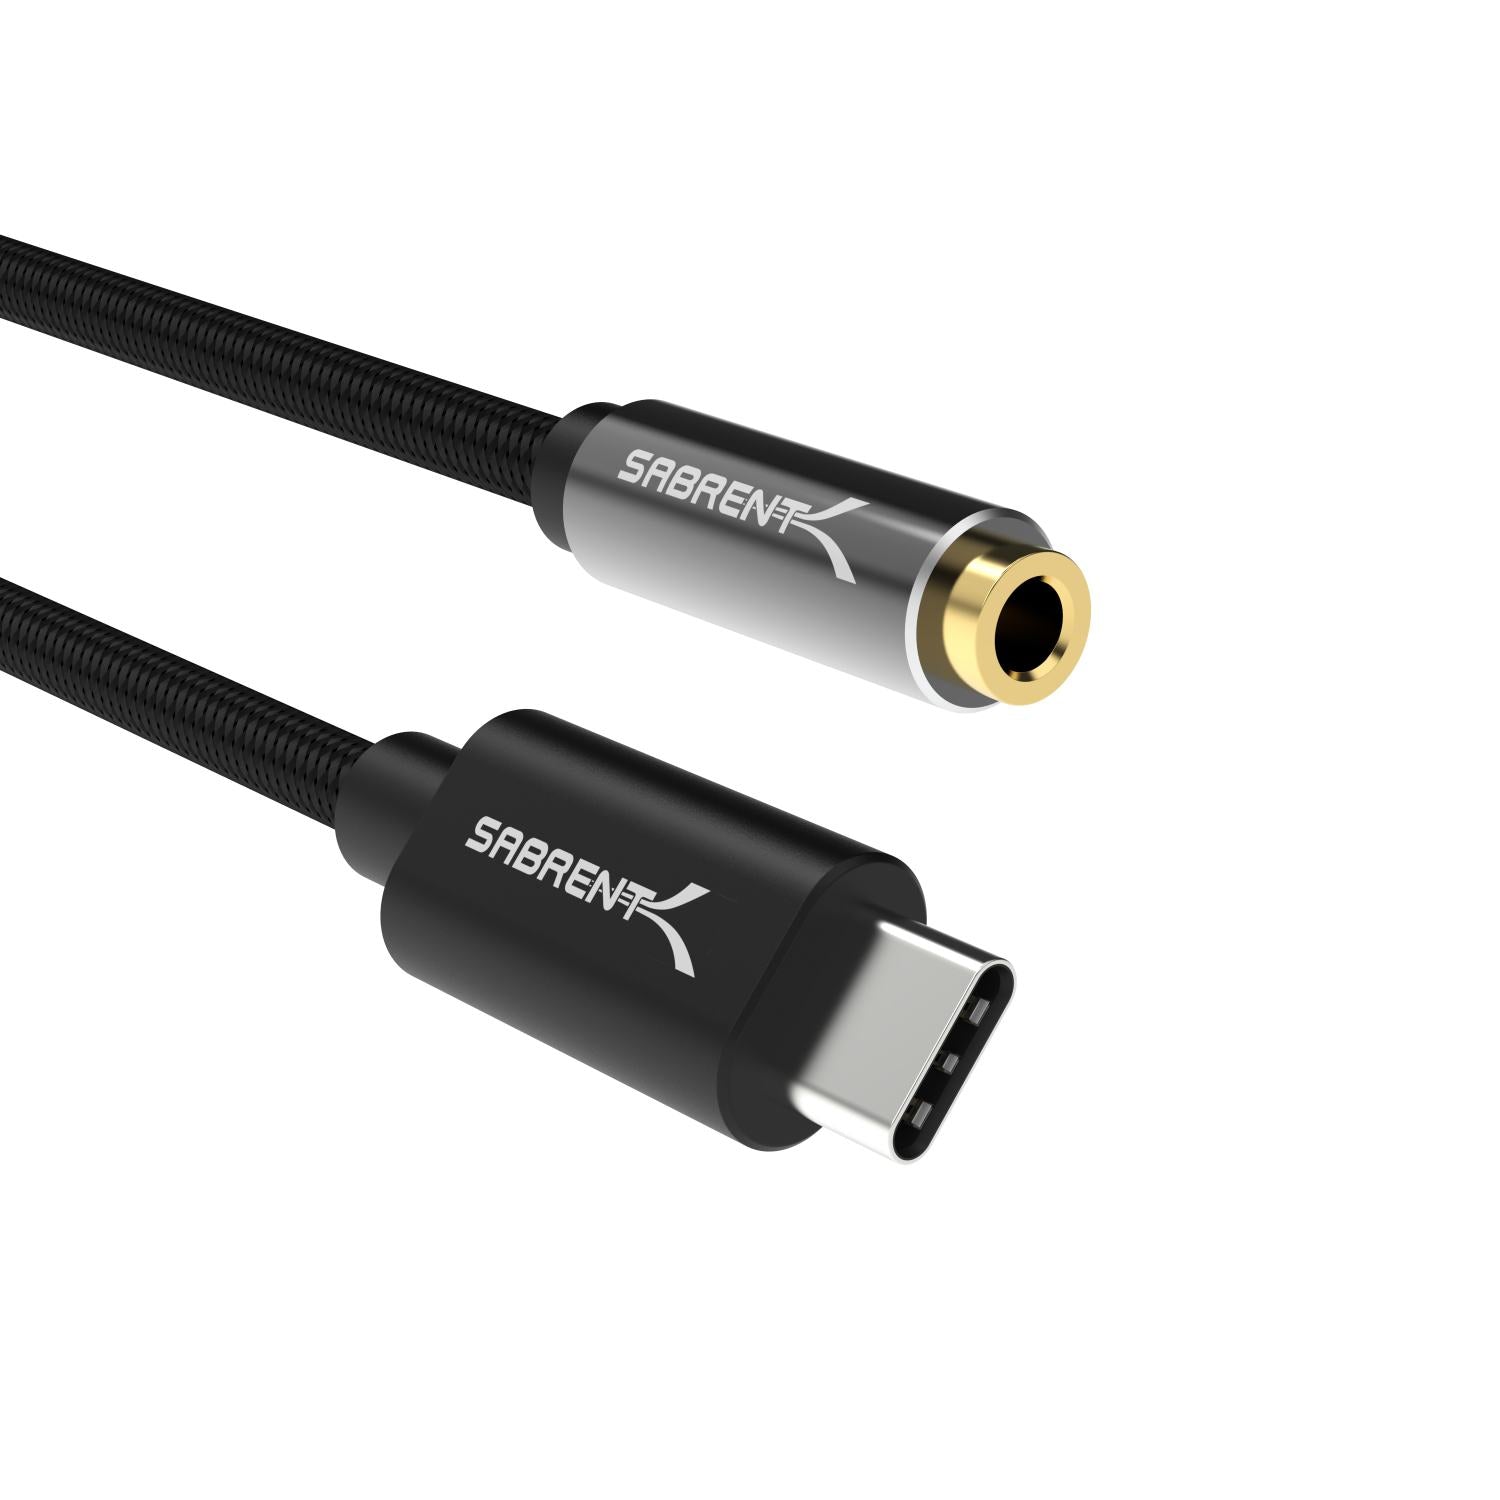 Corredor proteger hardware USB Type-C to 3.5mm Audio Jack Active Adapter 20" Cable - Sabrent